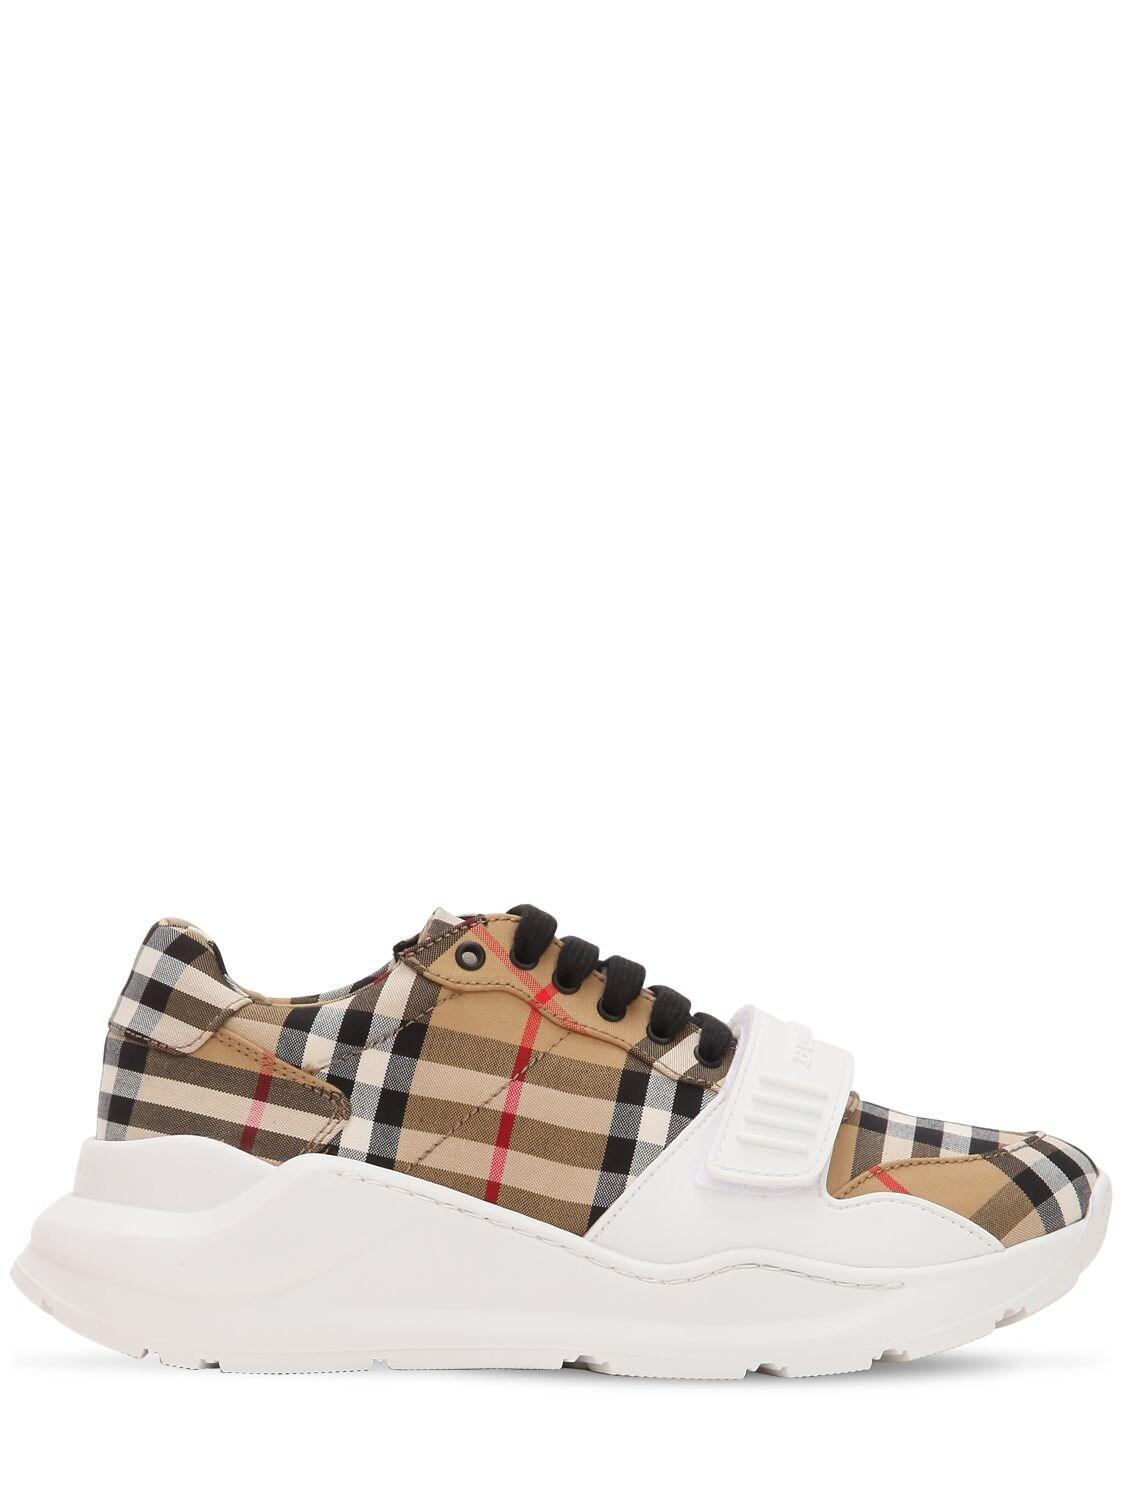 Burberry 30mm Regis Check Cotton Canvas Sneakers in Beige (Natural ...